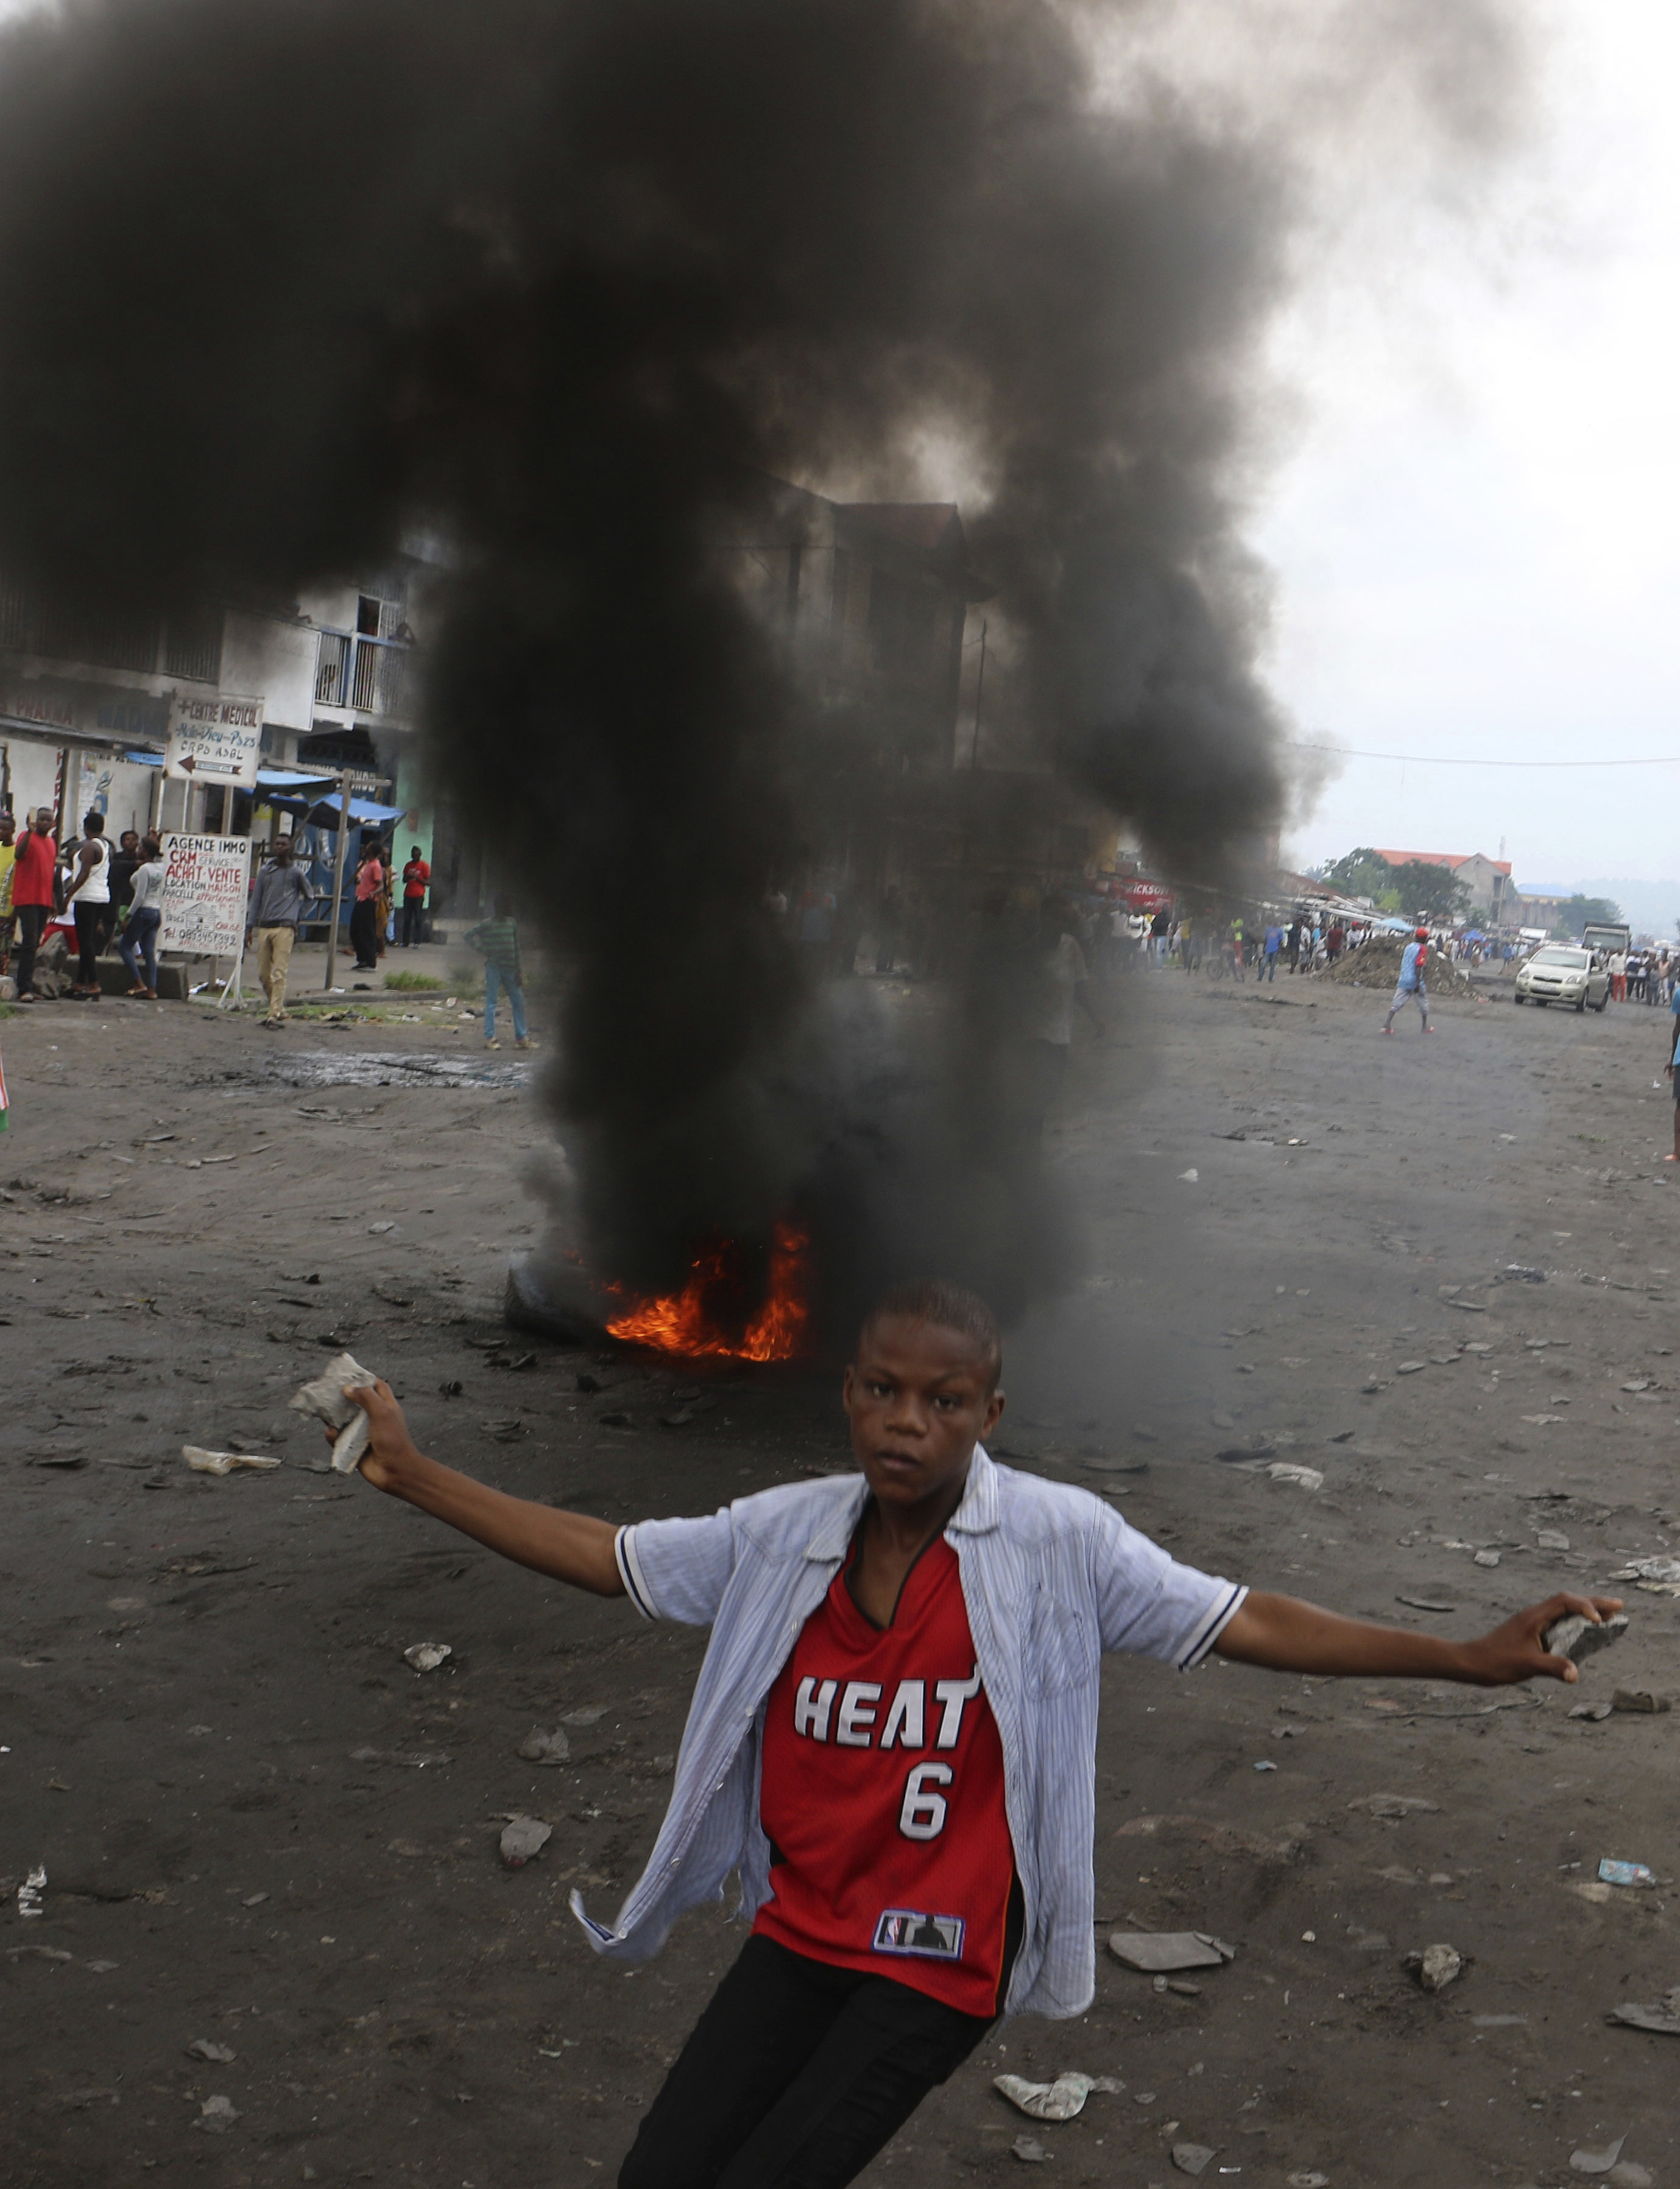 A Congolese boy protests against President Joseph Kabila's refusal to step down from power in Kinshasa, Democratic Republic of Congo, Sunday, Dec. 31, 2017. Congolese security forces shot dead two men outside a church on Sunday while dispersing demonstrators protesting in the country's capital against President Joseph Kabila's refusal to step down from power, according to Human Rights Watch. (AP Photo/John Bompengo)